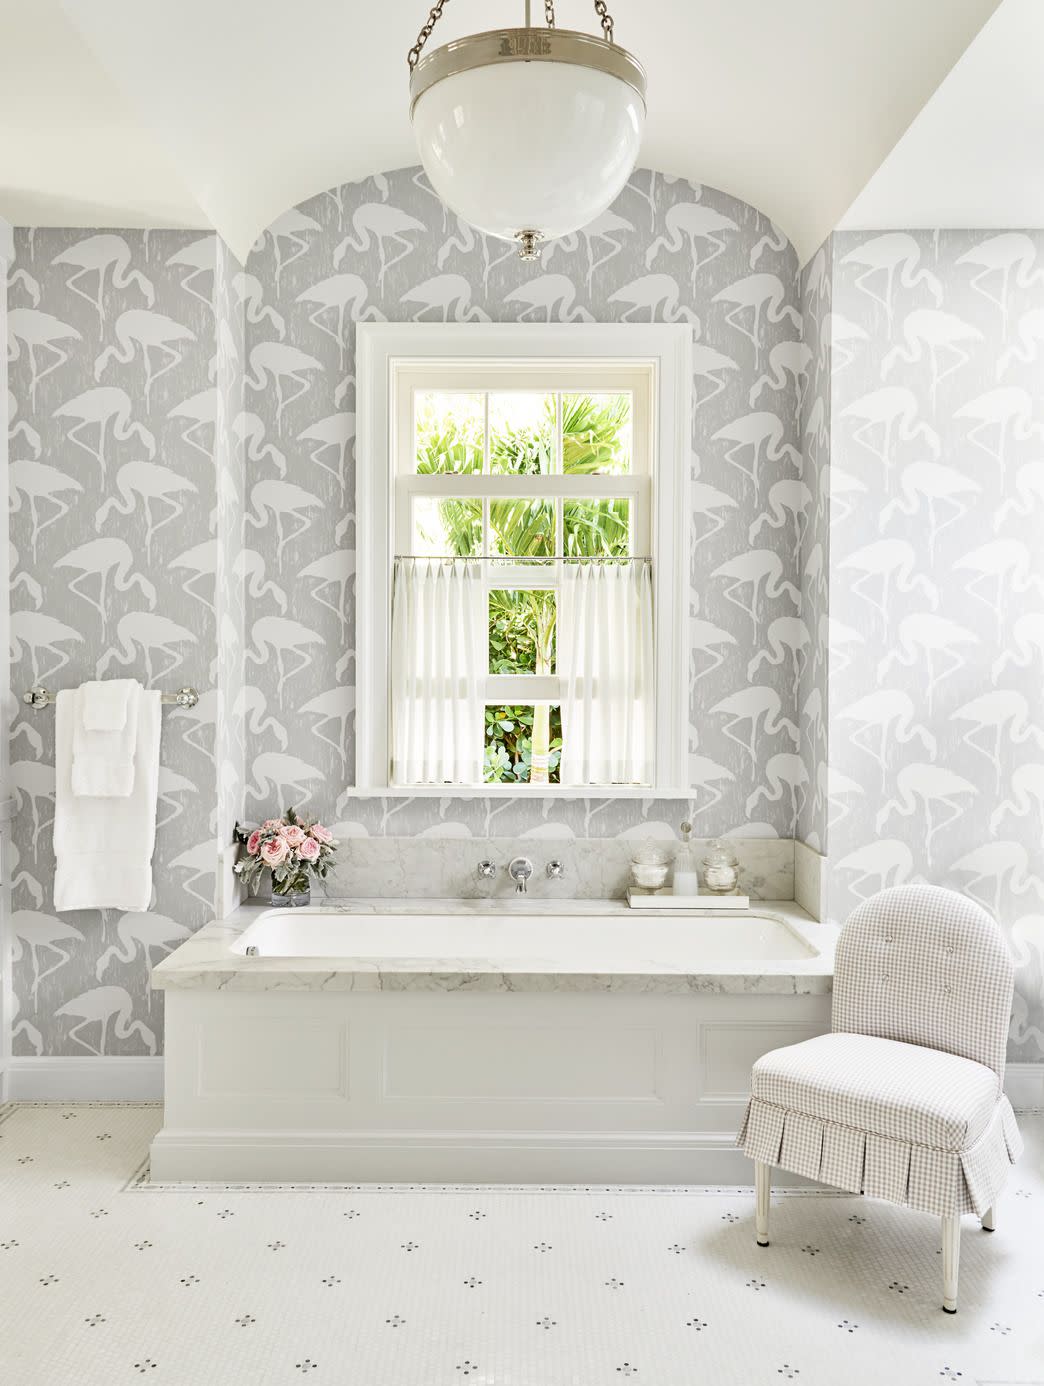 fun flamingo wallpaper in subtle gray and white on the walls around a soaking tub in a white bathroom